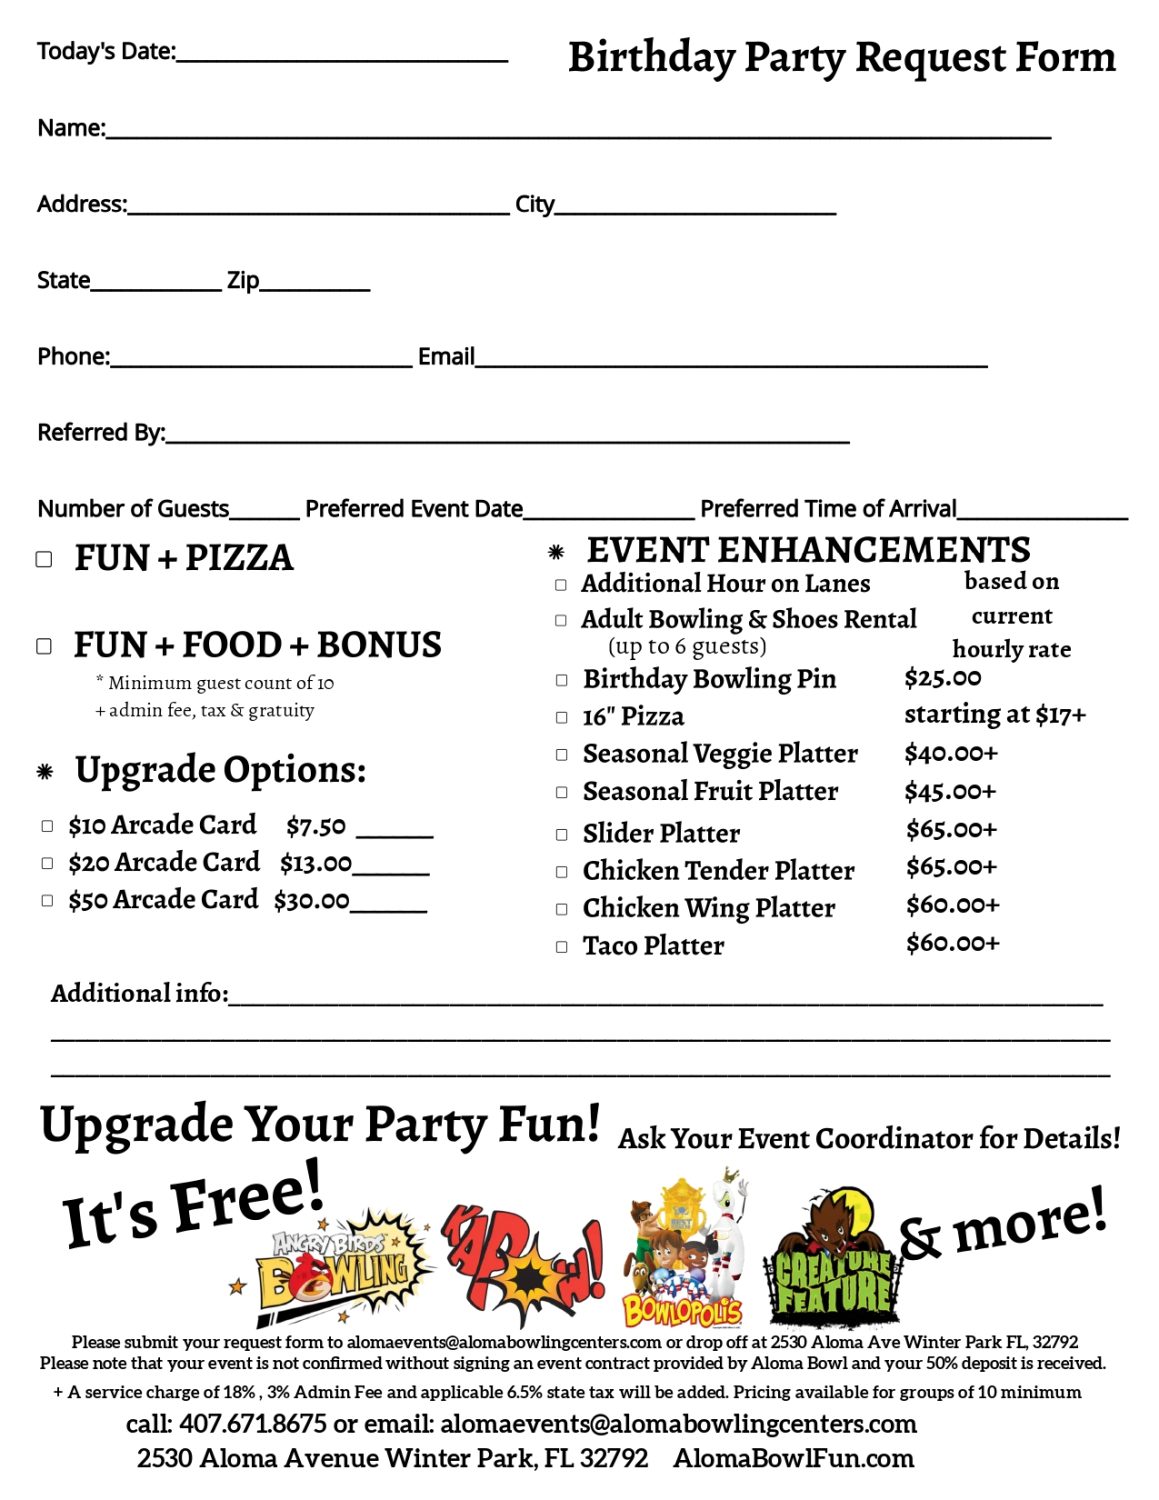 Birthday Party Request Form